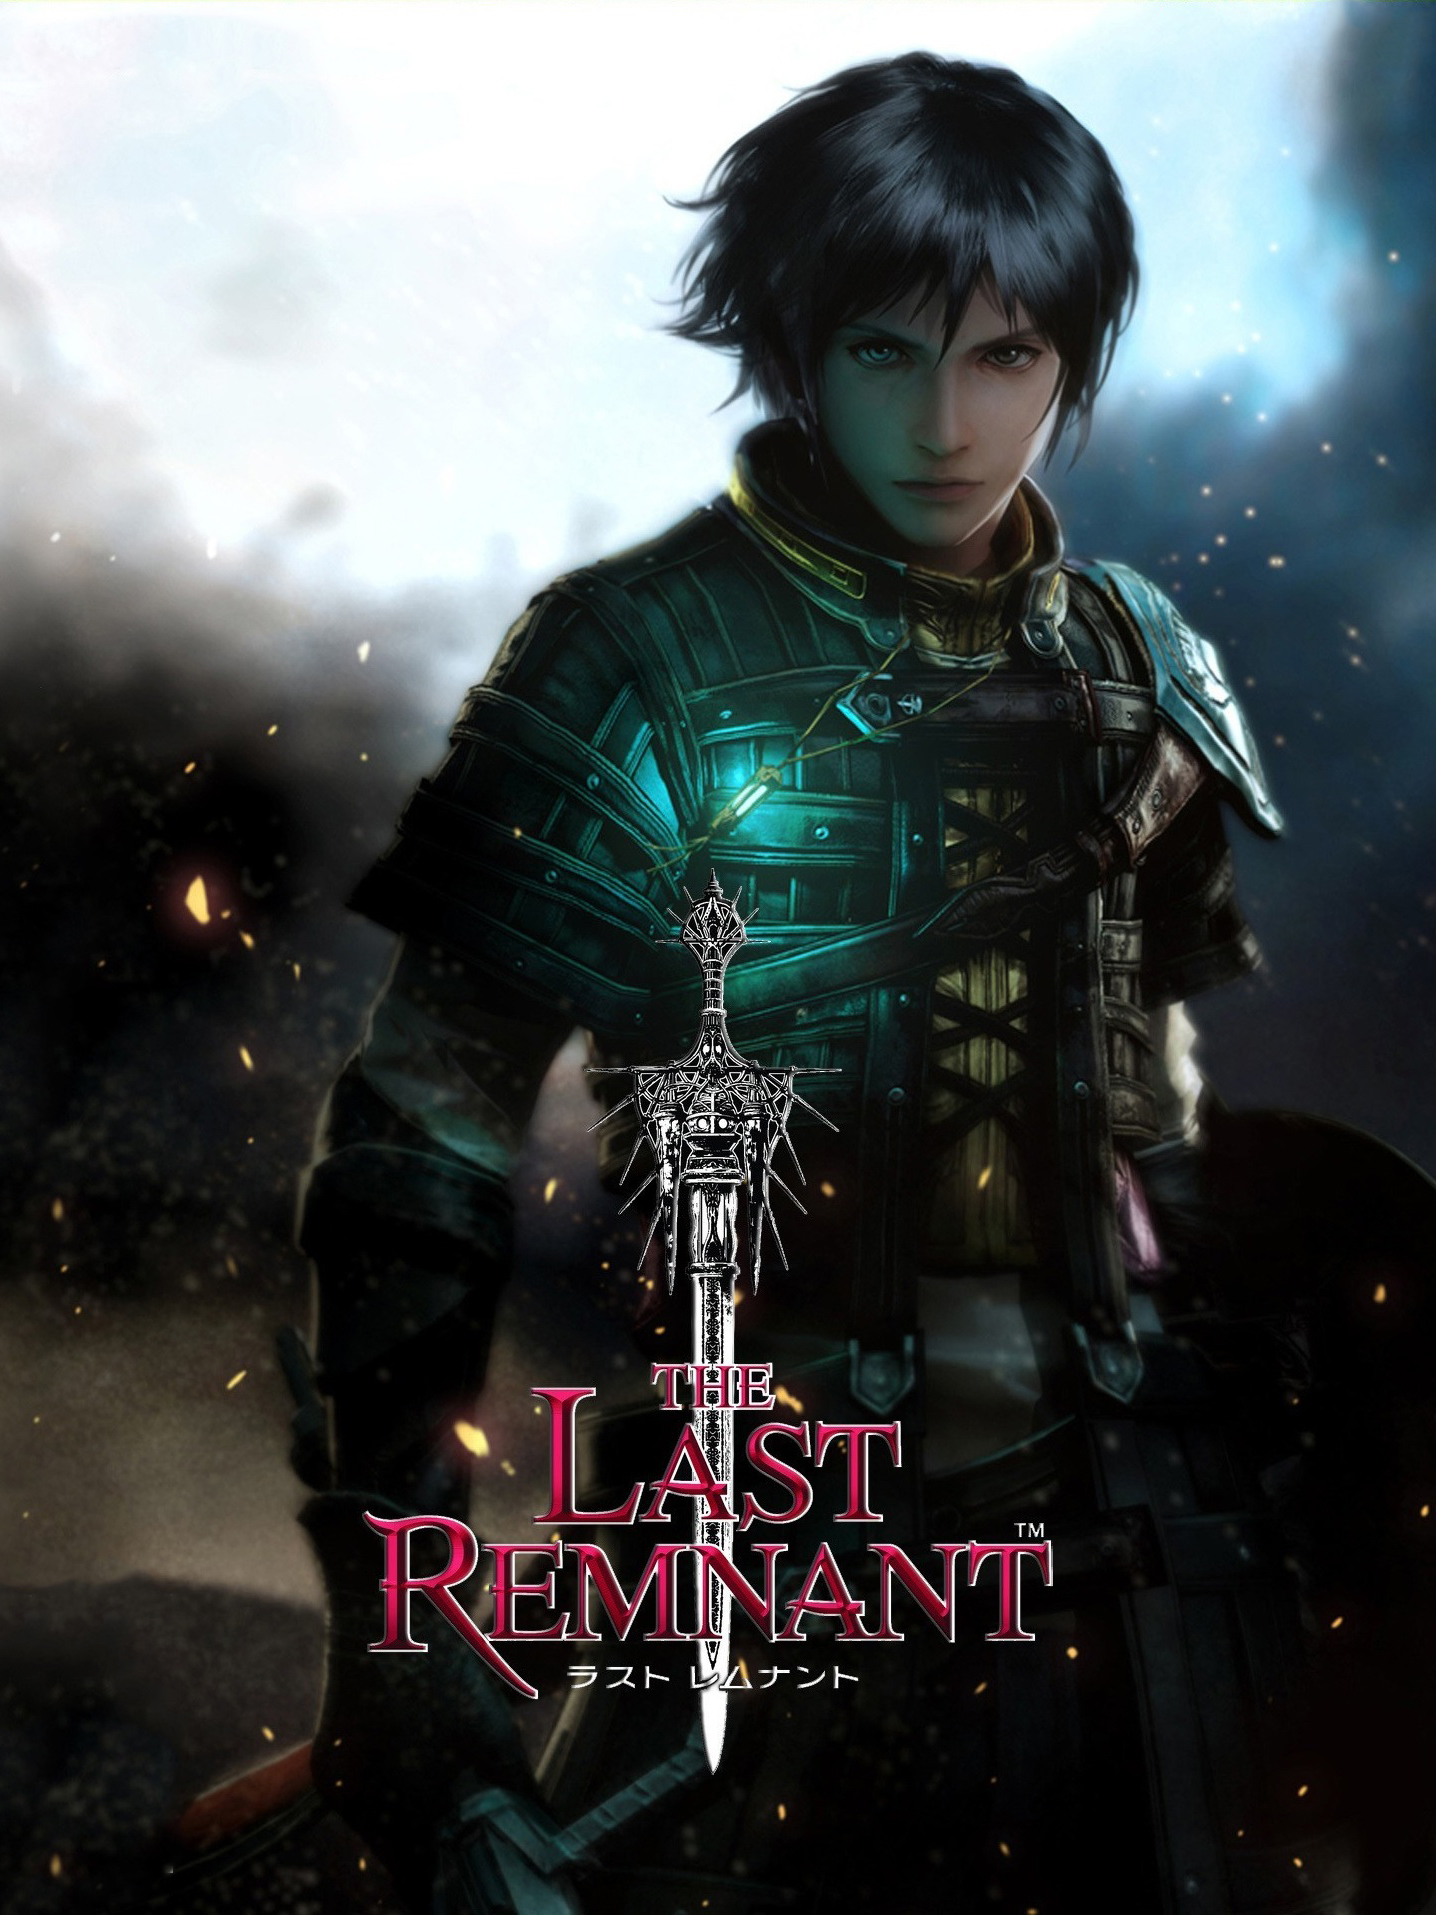 Last remnant remastered steam фото 101